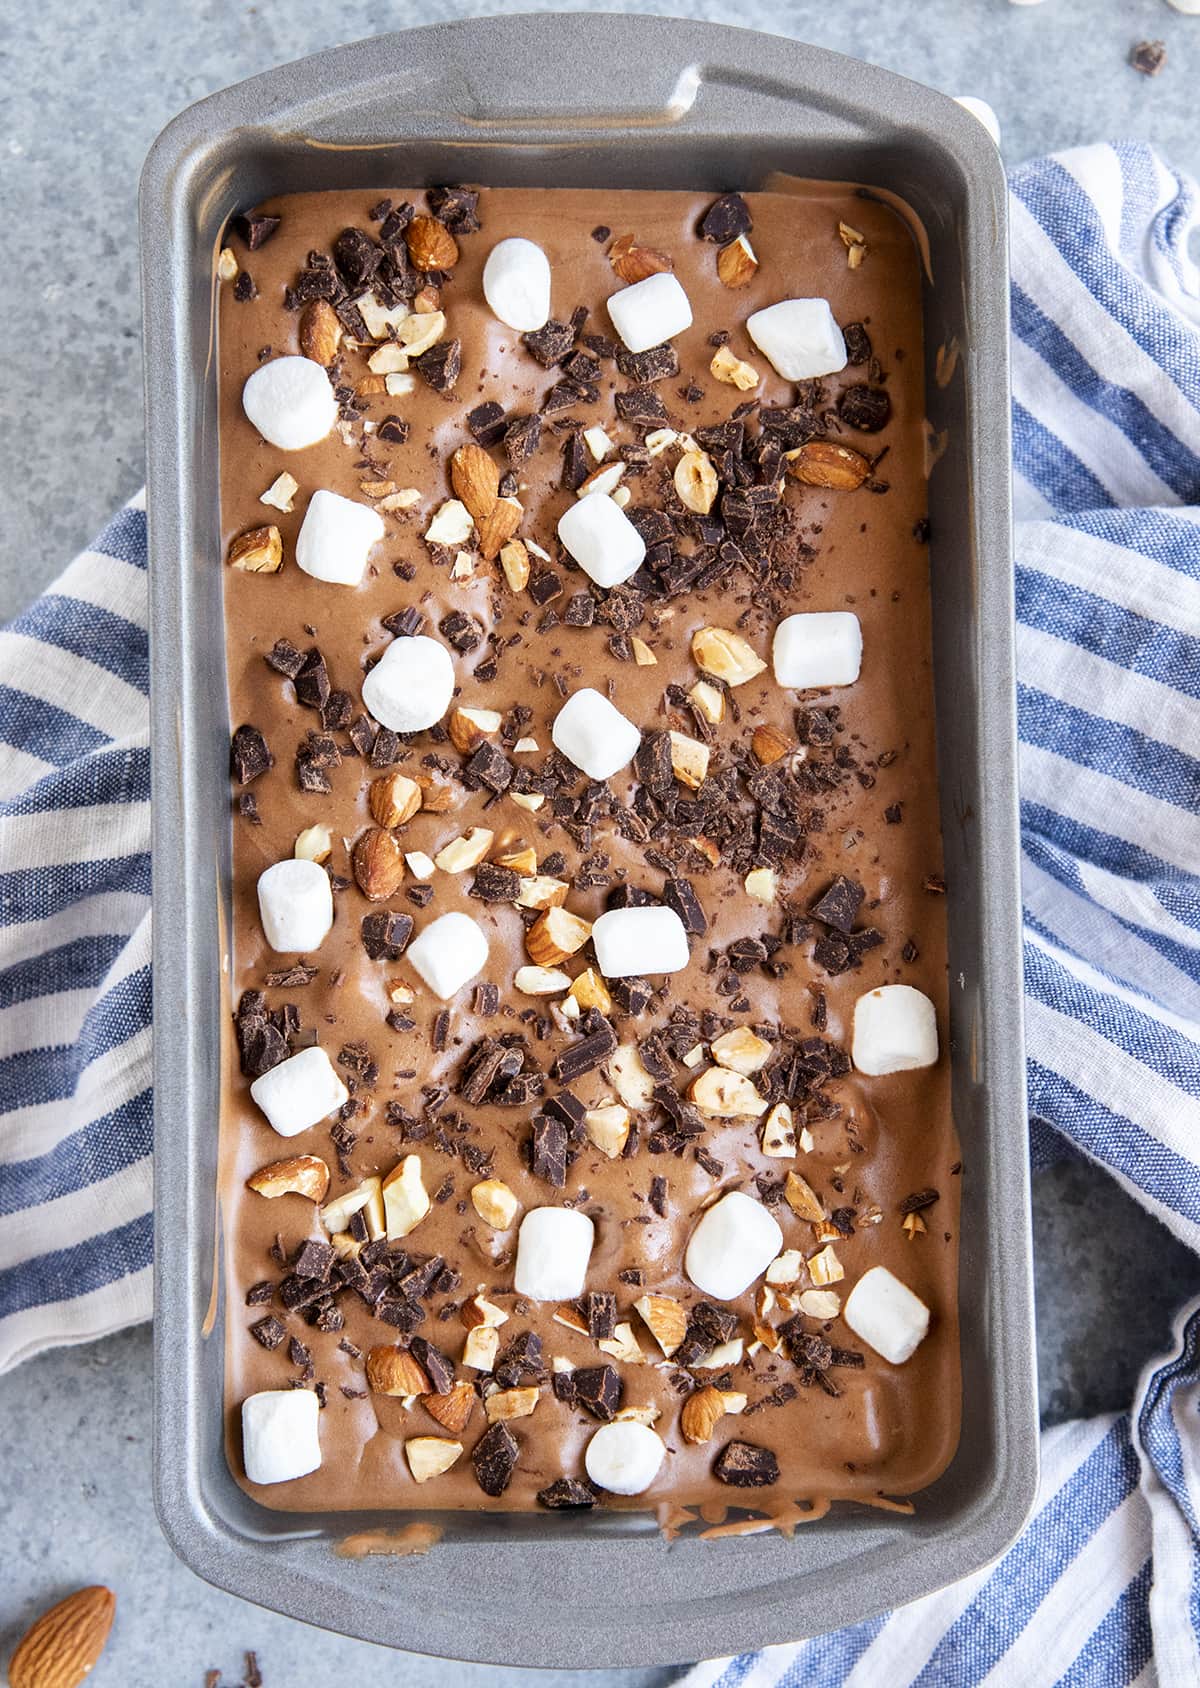 An overhead photo of a metal container full of chocolate ice cream topped with chocolate pieces, mini marshmallows, and chopped almonds.